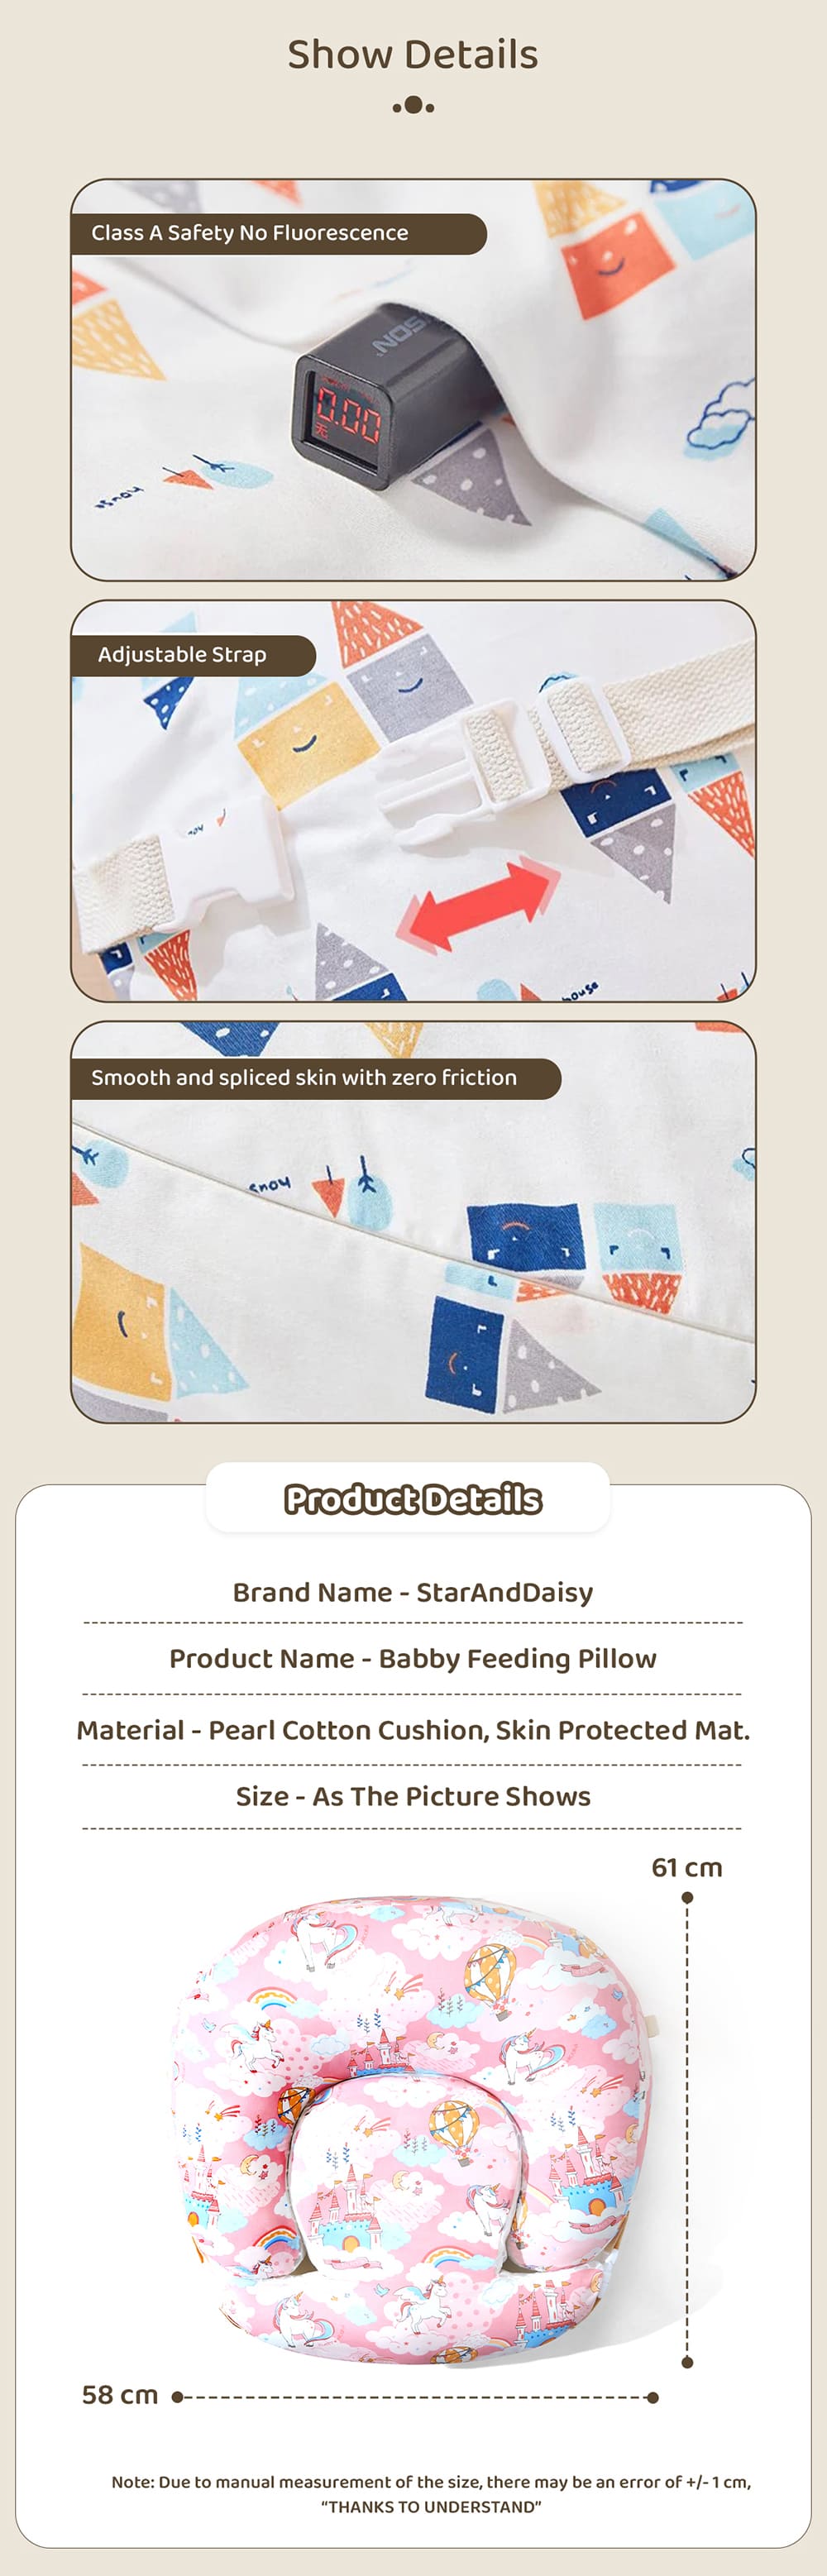 Specification of Baby Feeding Pillow